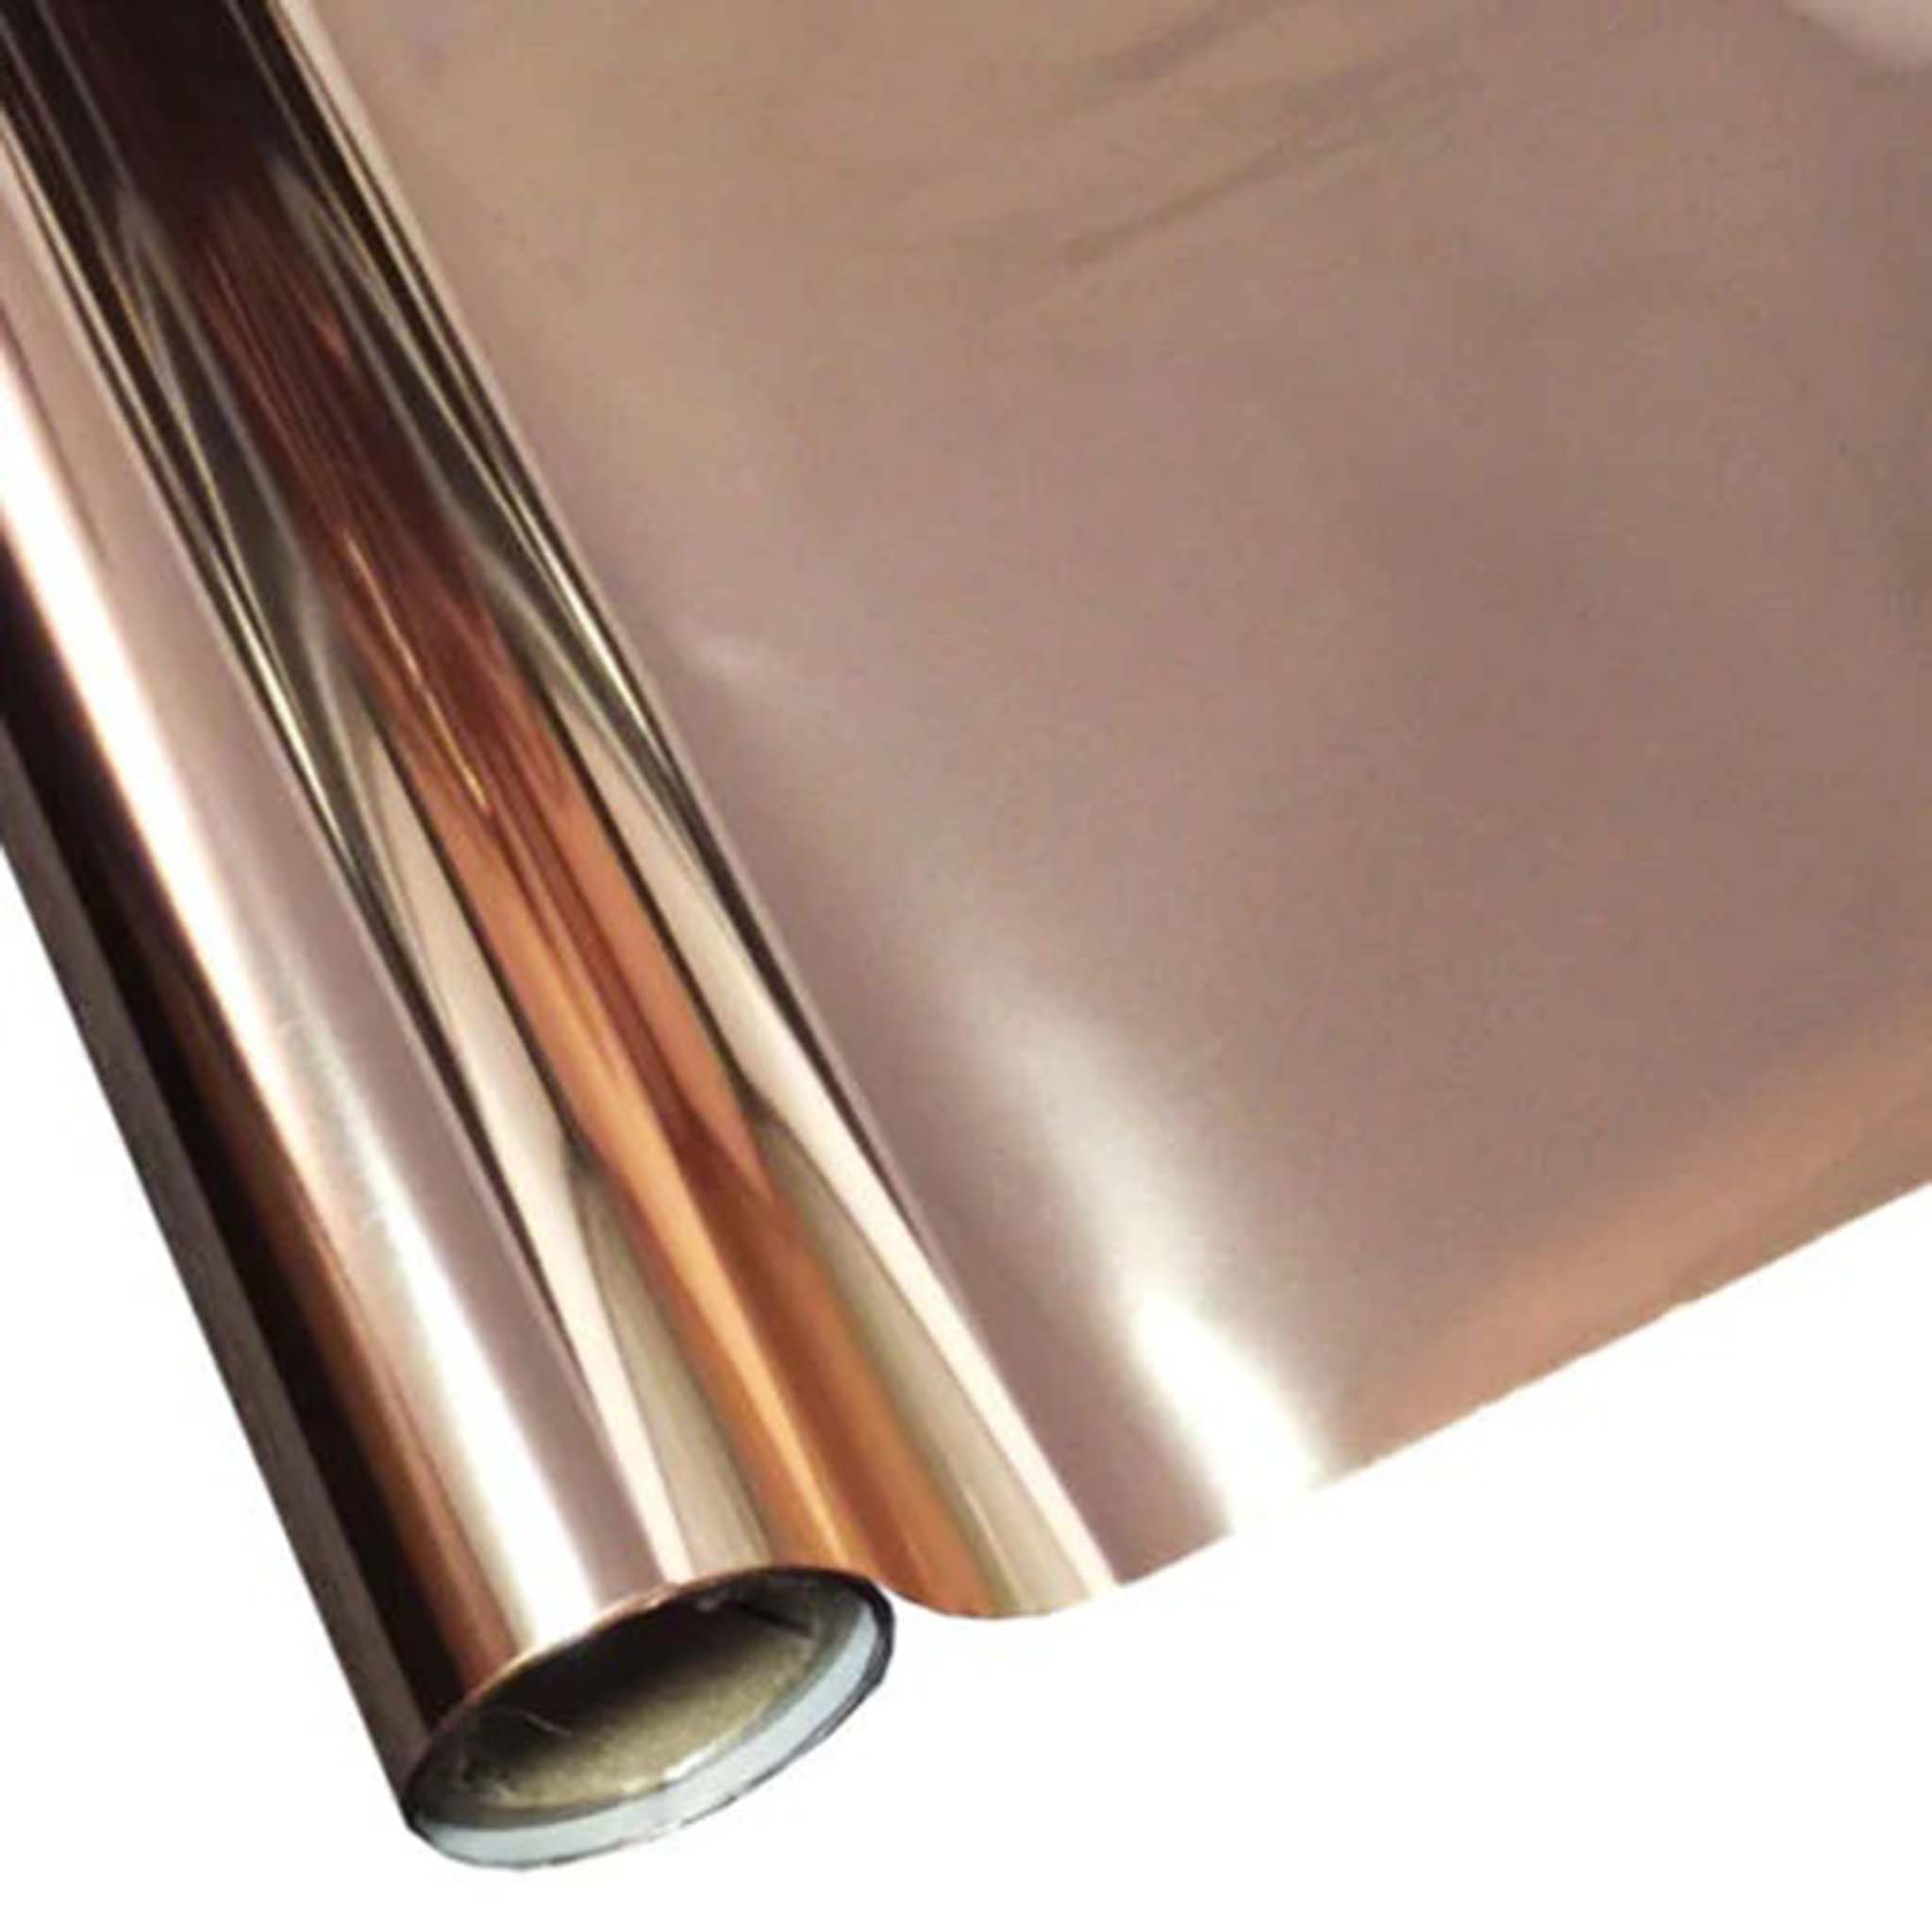 A roll of a pink gold metallic foil transfer is against a white background.